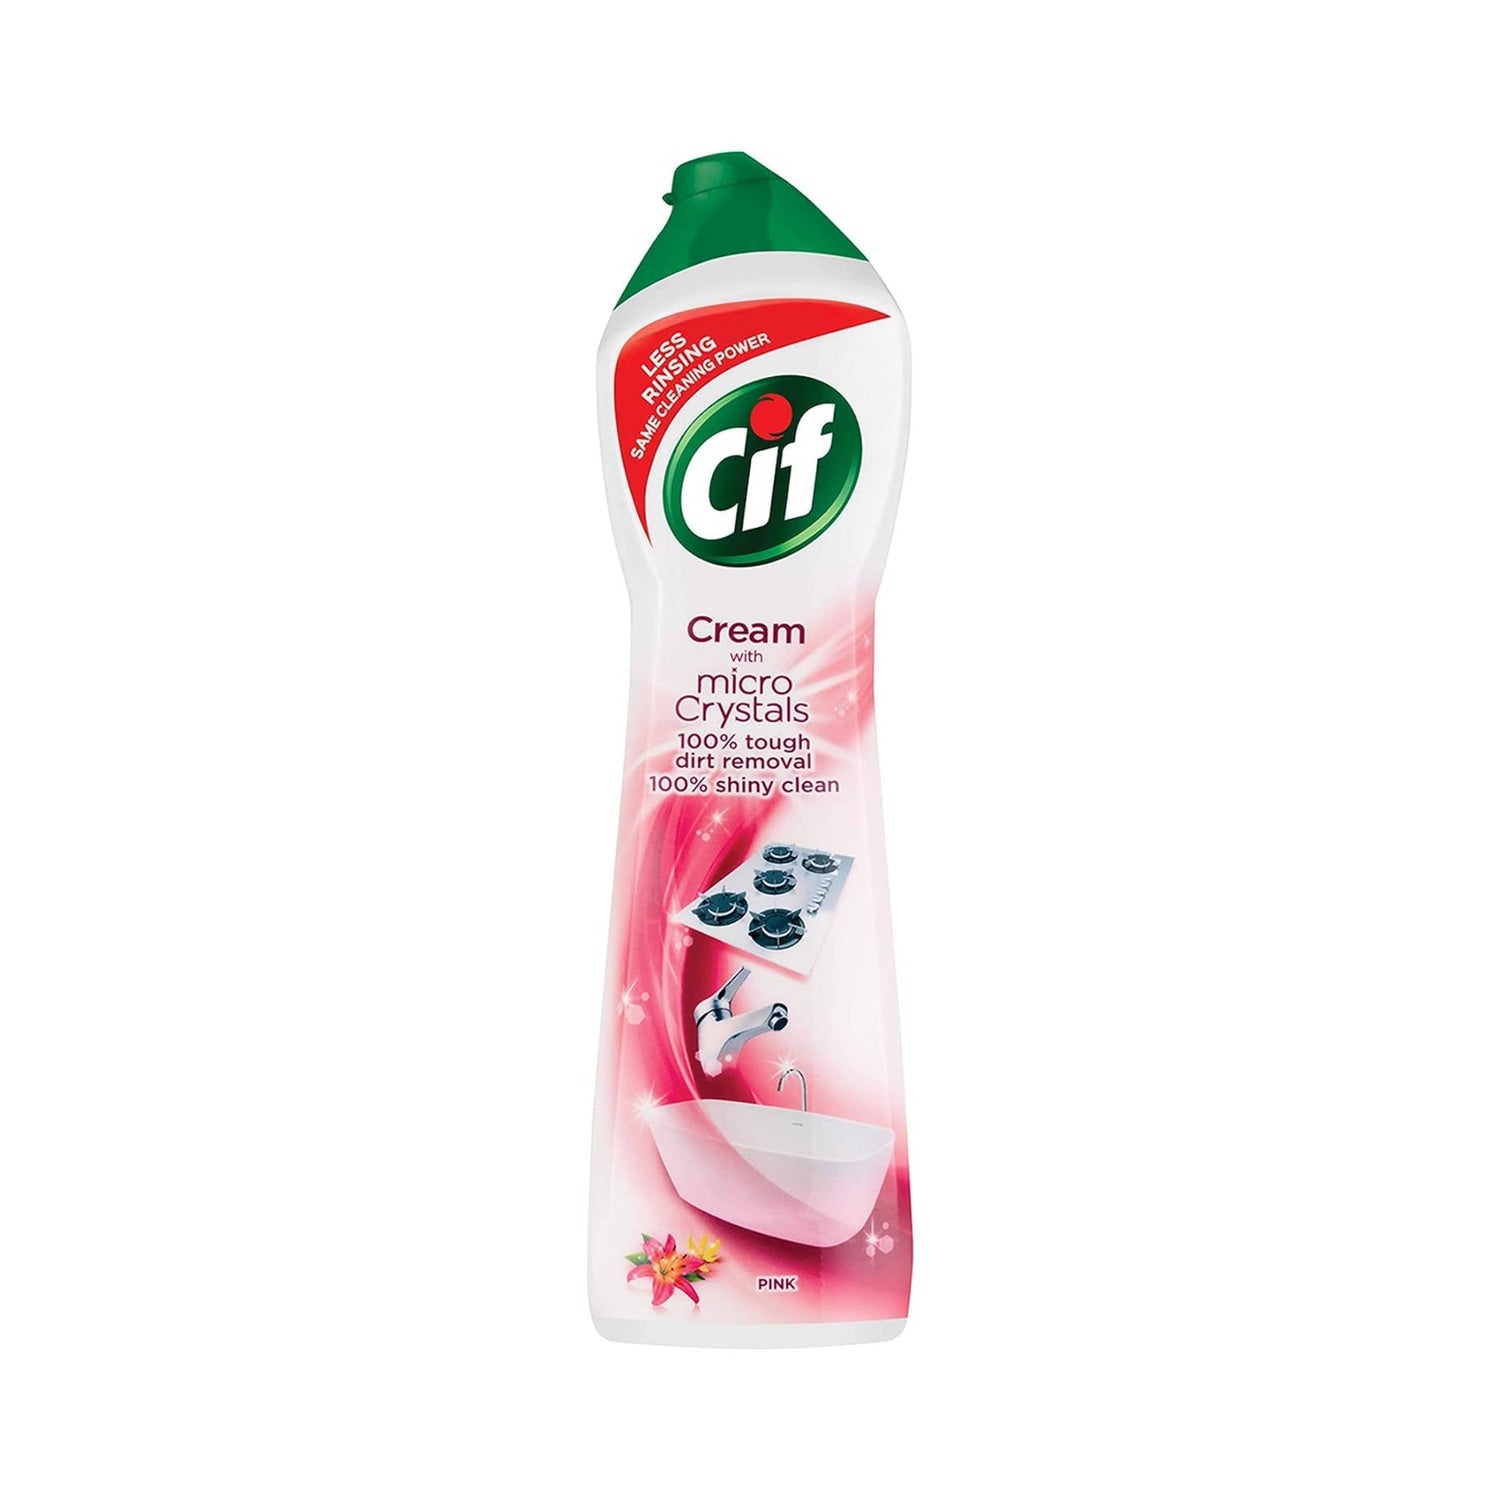 Cif Cream with Micro Crystal Pink Flower | 500ml